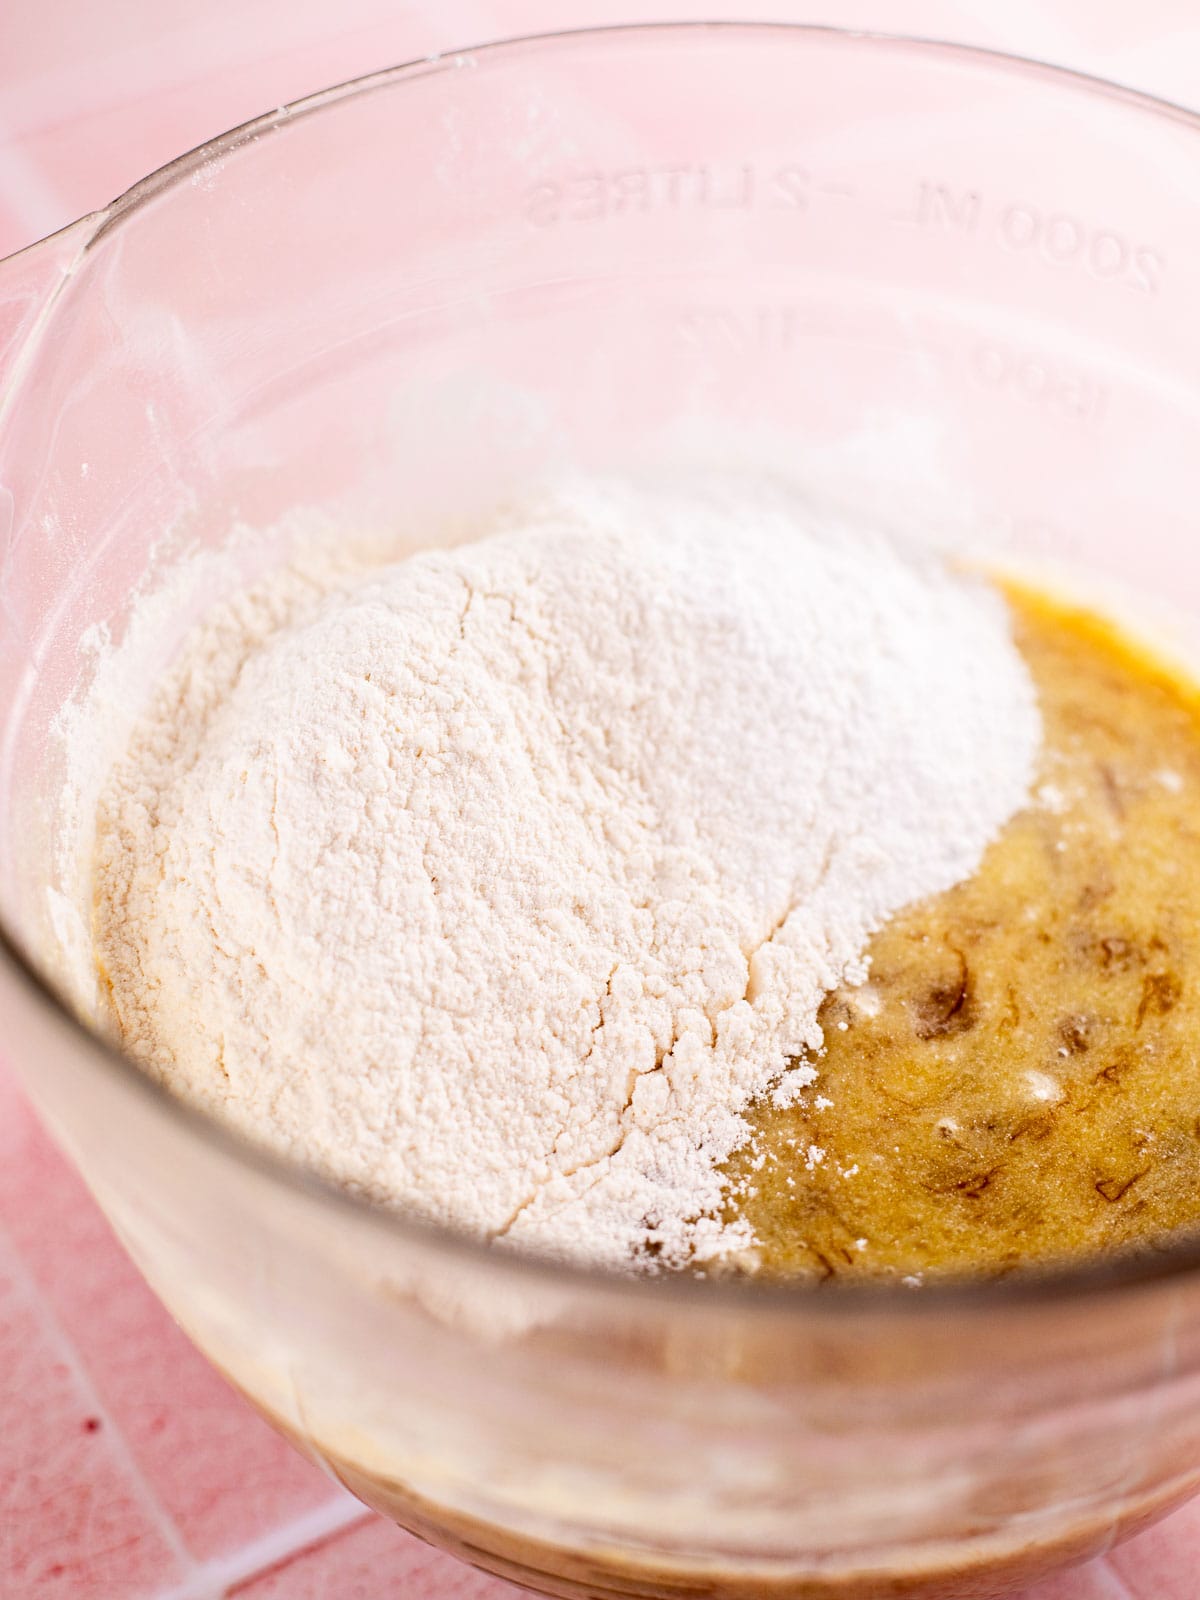 flour, salt, and baking powder in a glass bowl of wet ingredients for banana muffins.